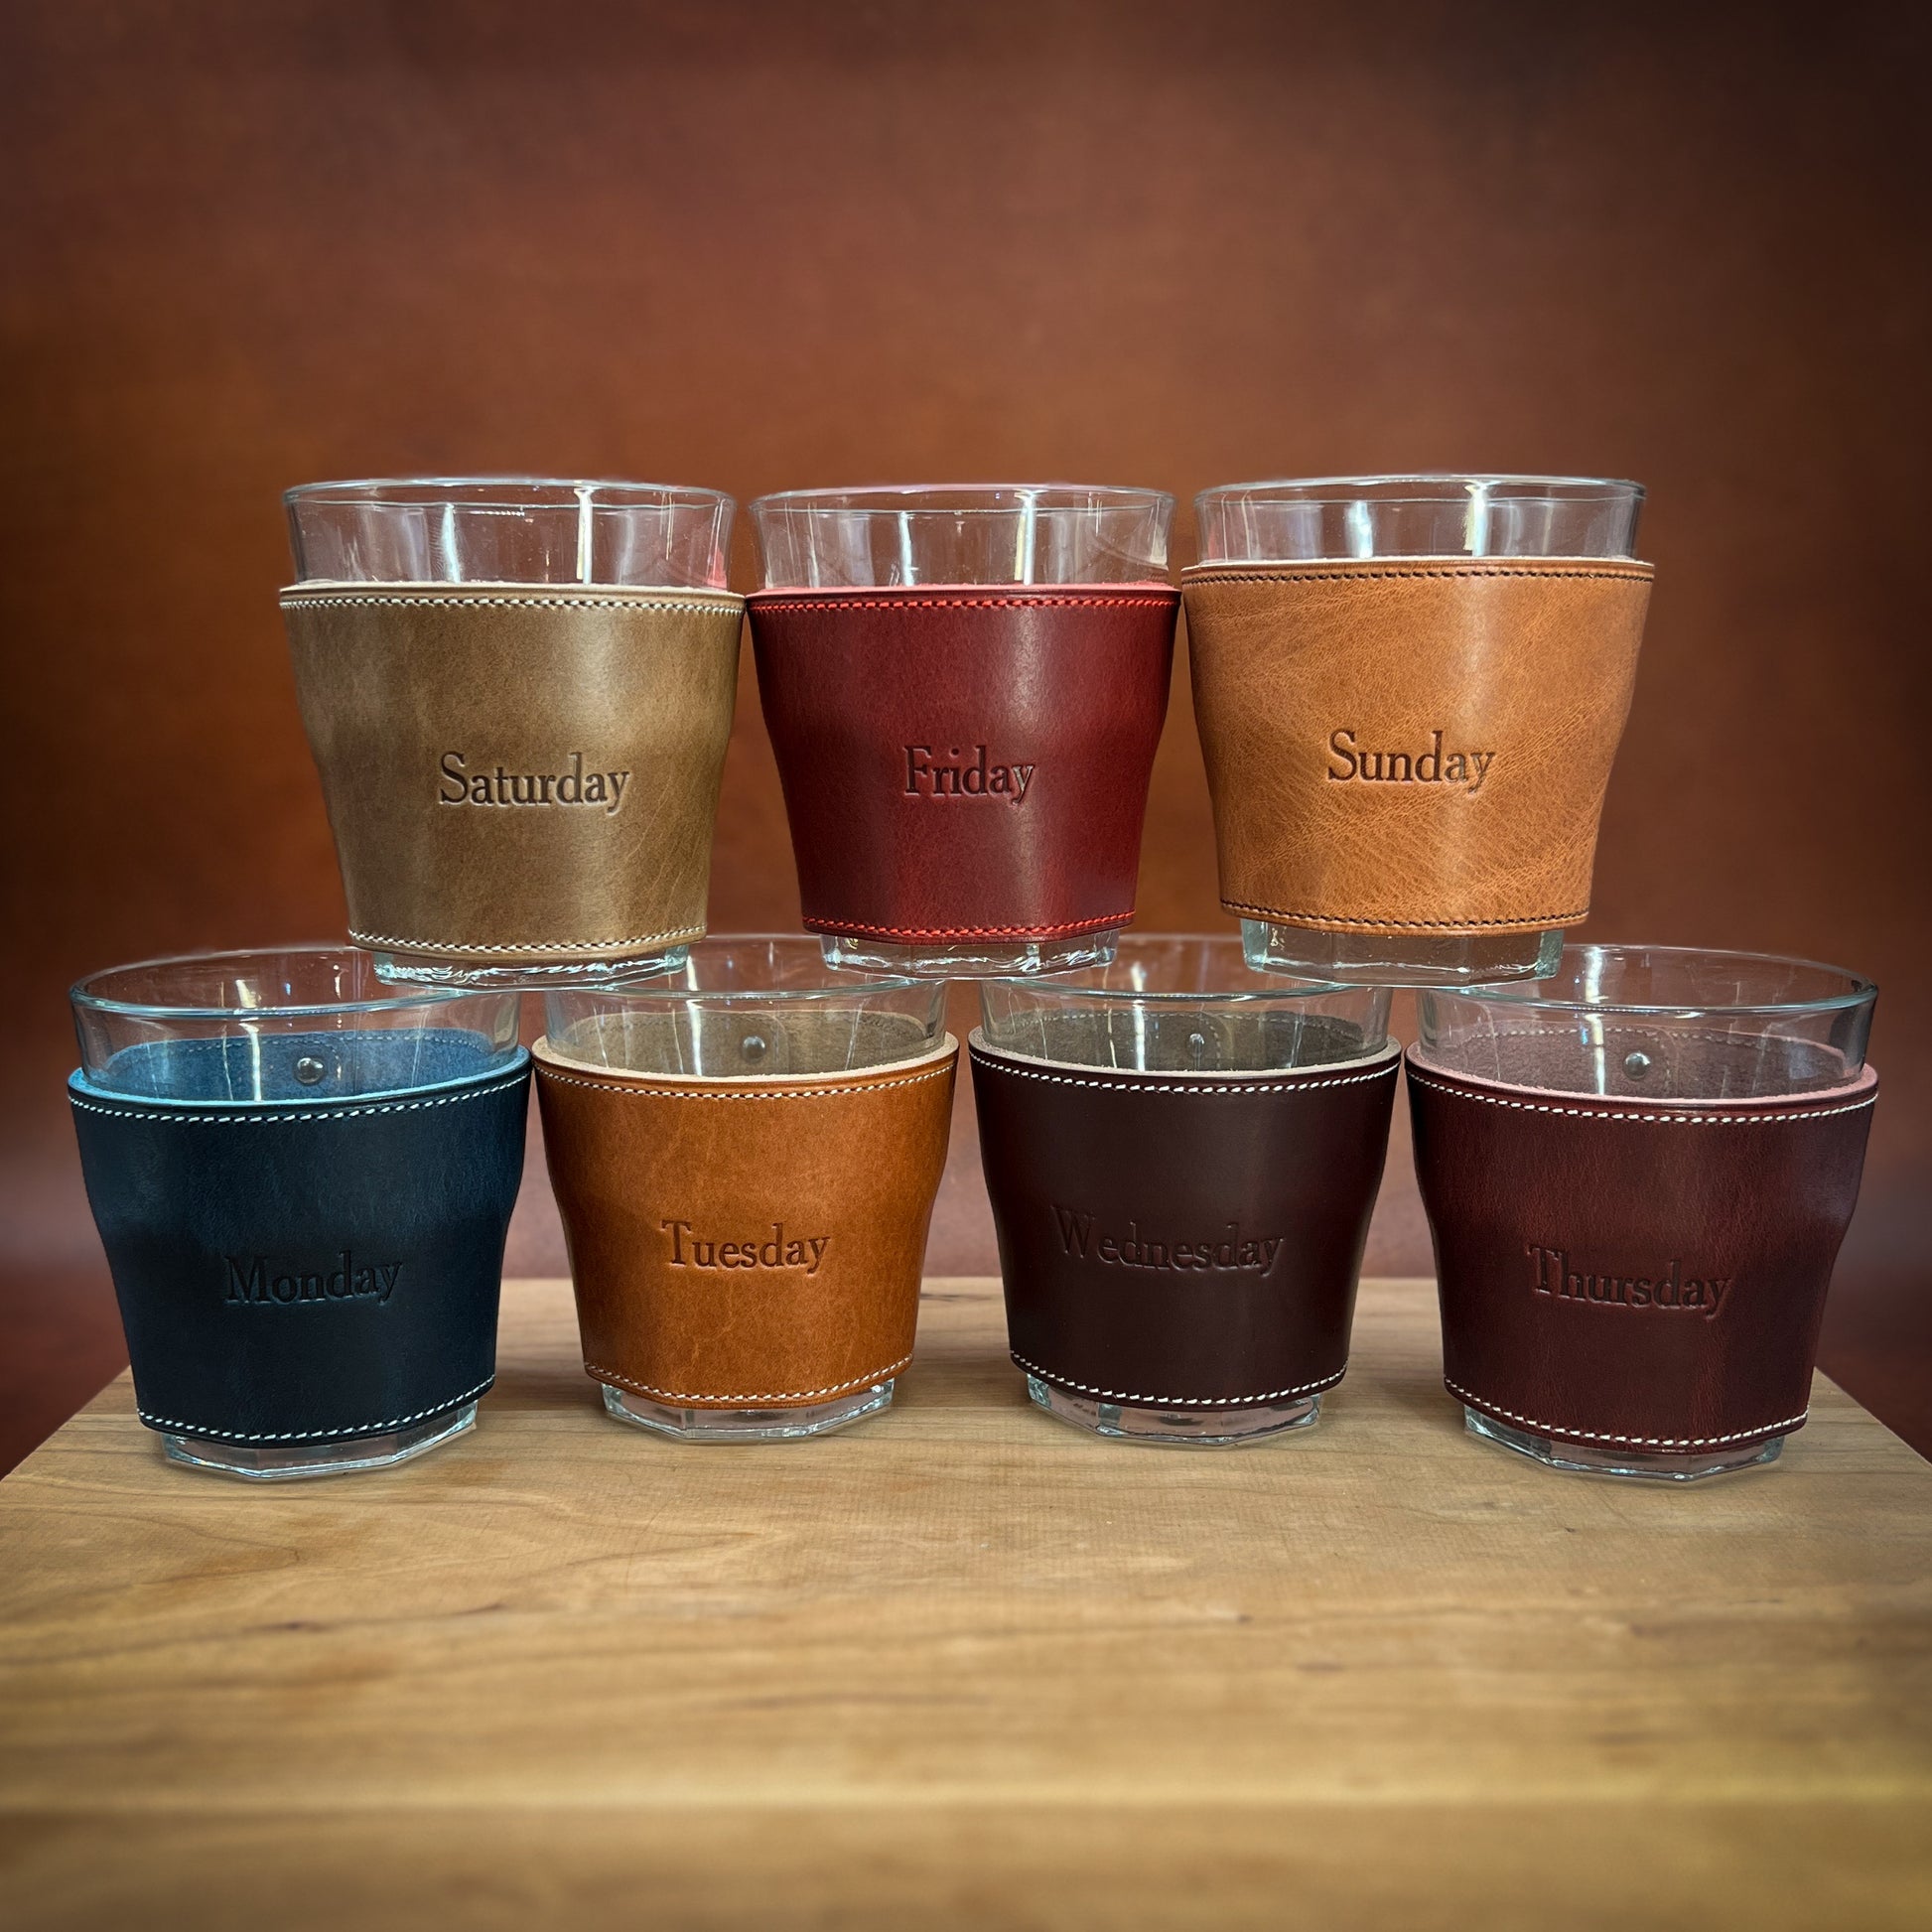 Horween Leather Wrapped Whiskey Glasses in colors for every decor.